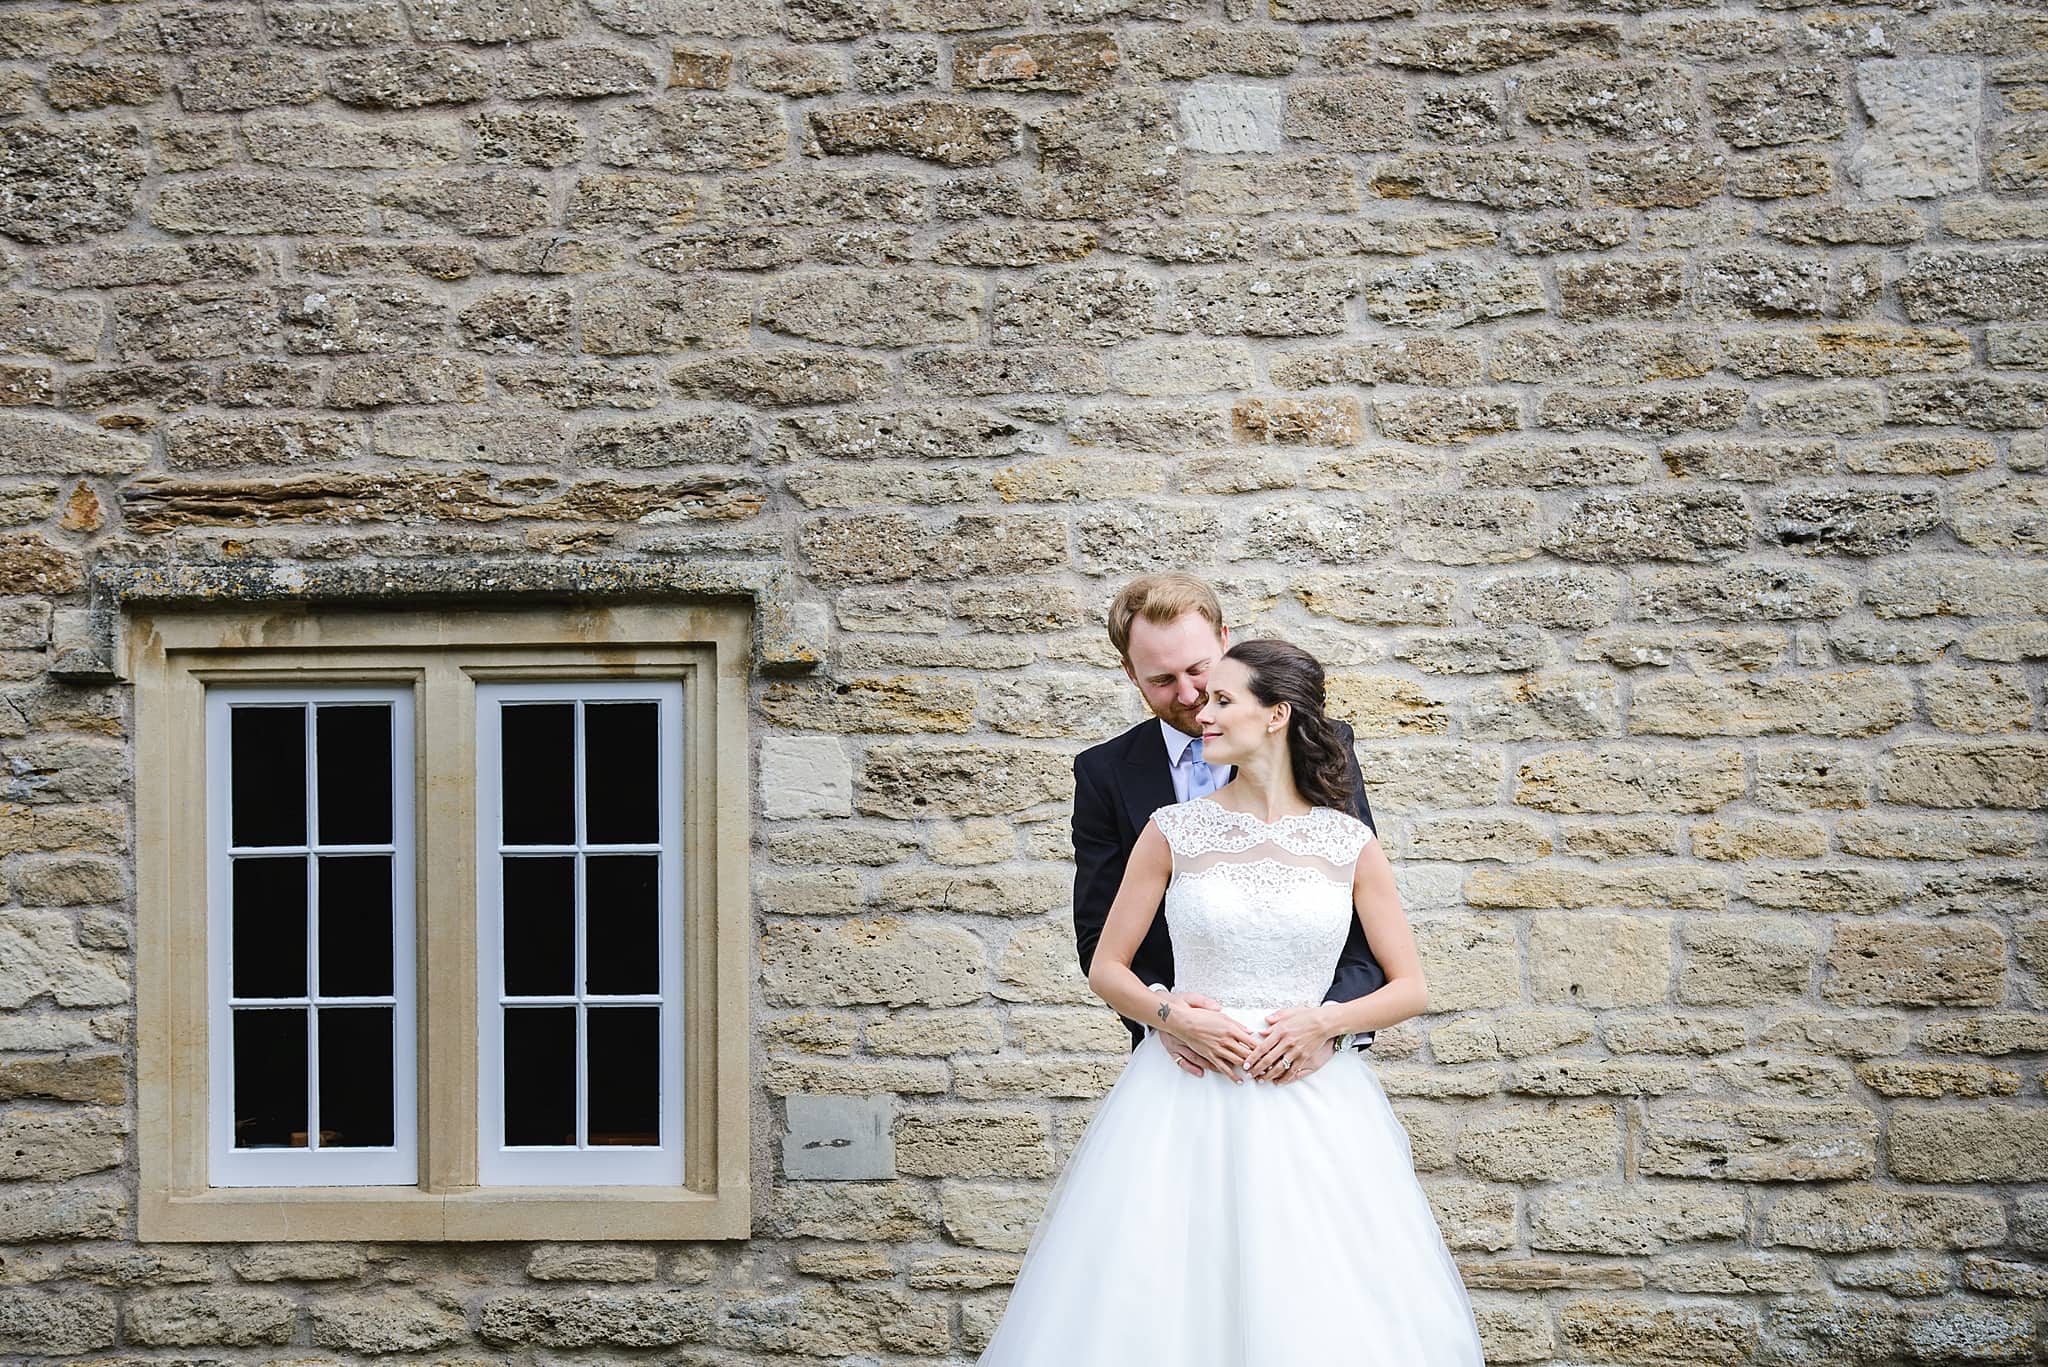 Bride and groom embrace each other in front of a brick wall and window outside Wick Farm